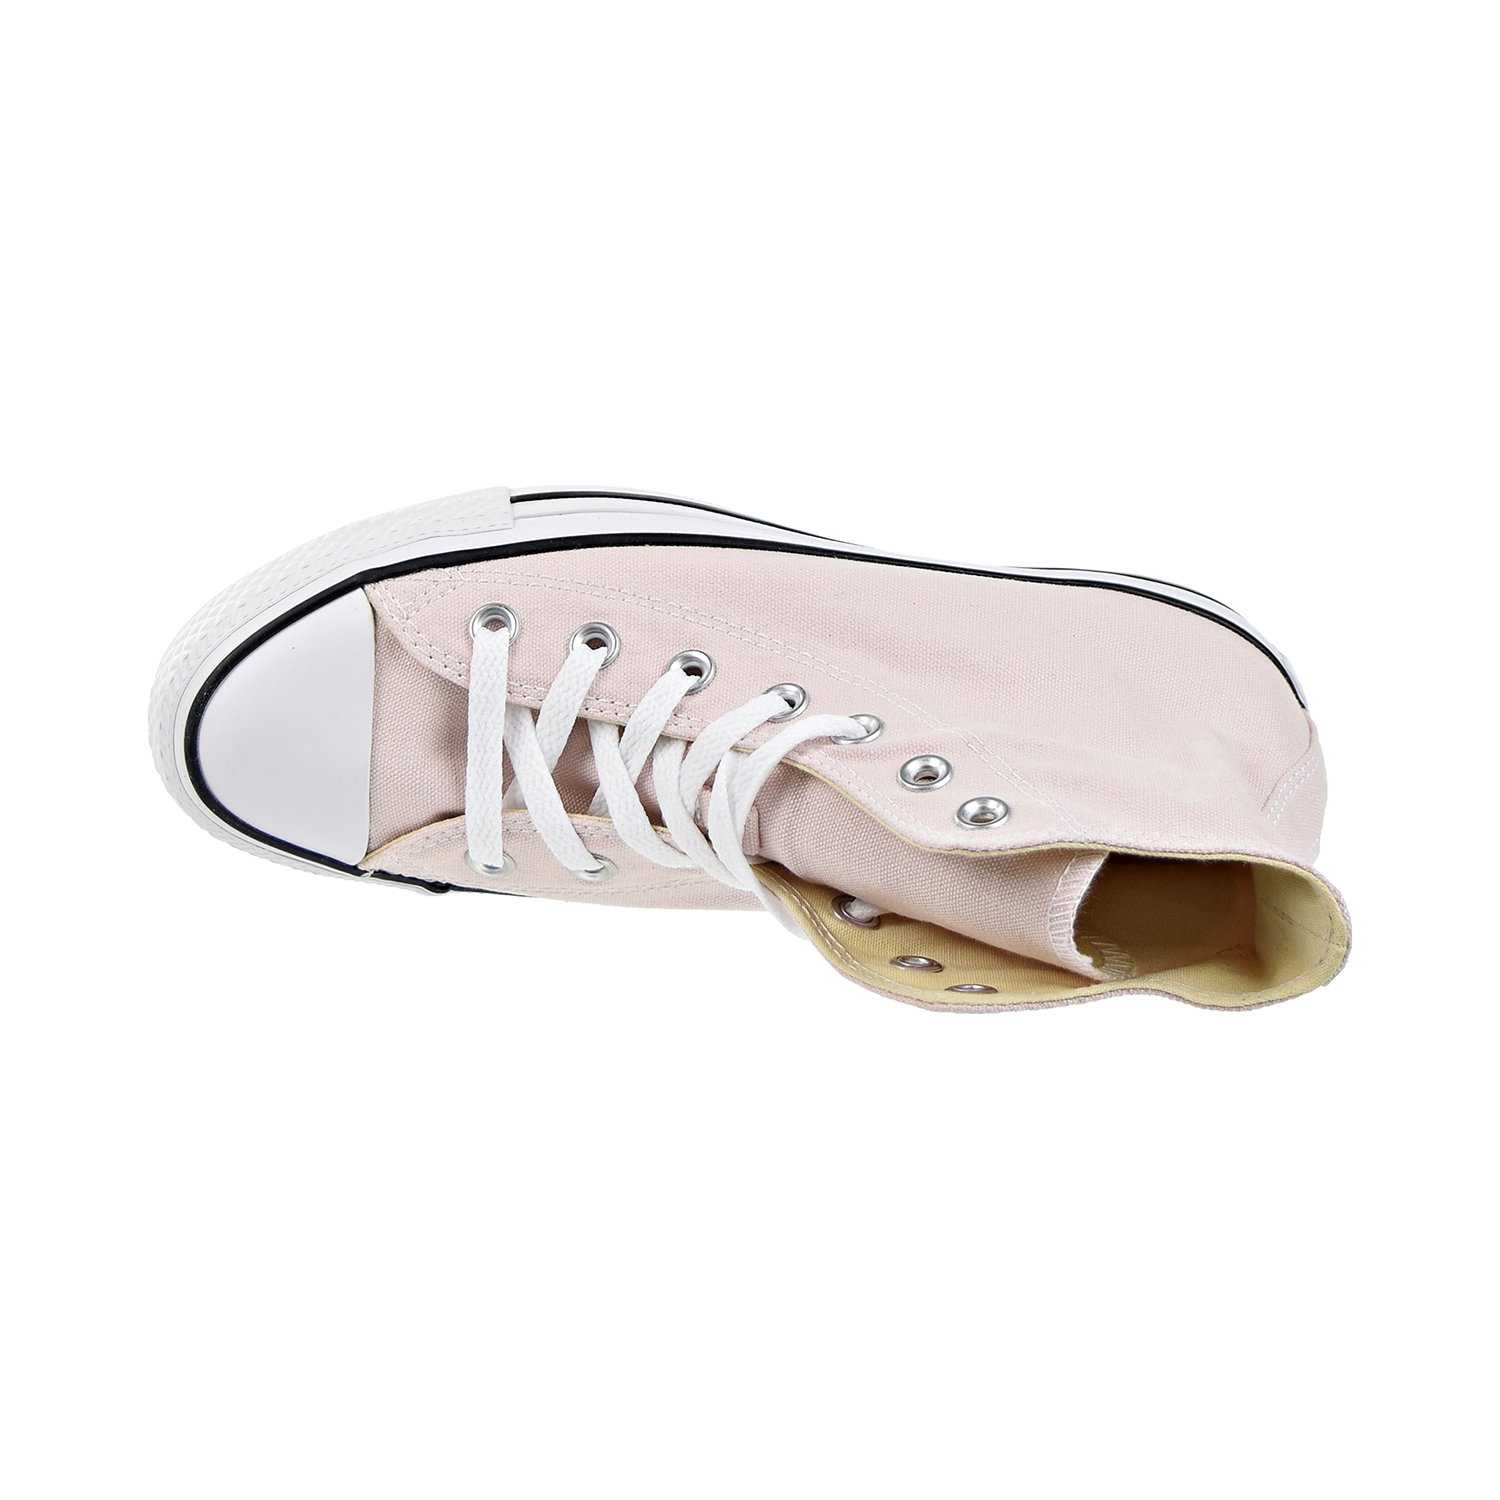 Converse Chuck Taylor All Star Hi Mens Shoes Barely Pink  159619f - image 5 of 6